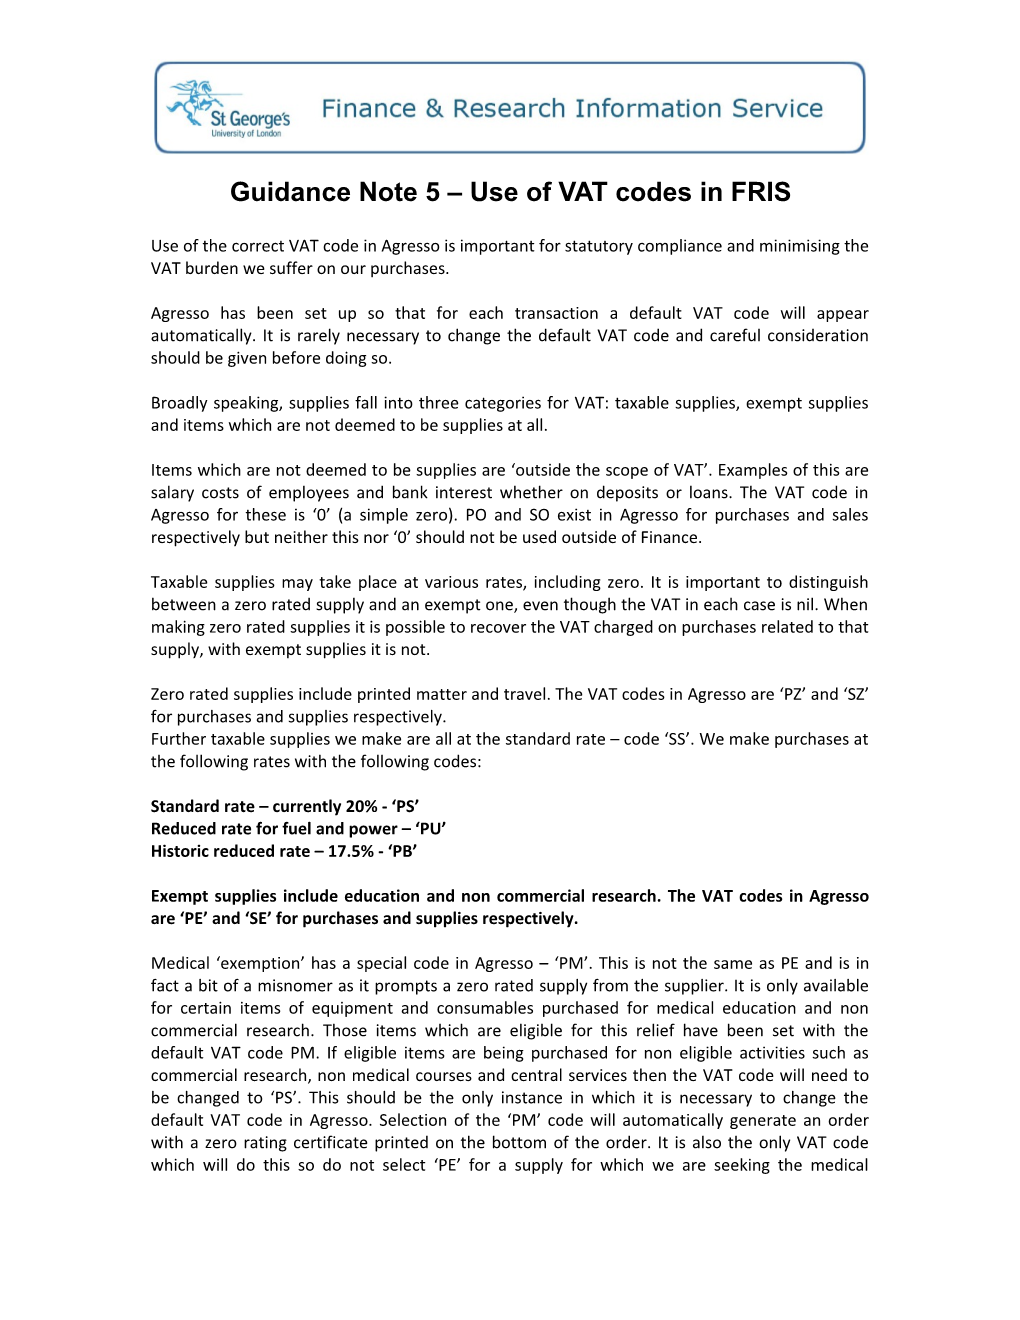 FRIS Guidance on VAT and the Use of VAT Codes in Agresso